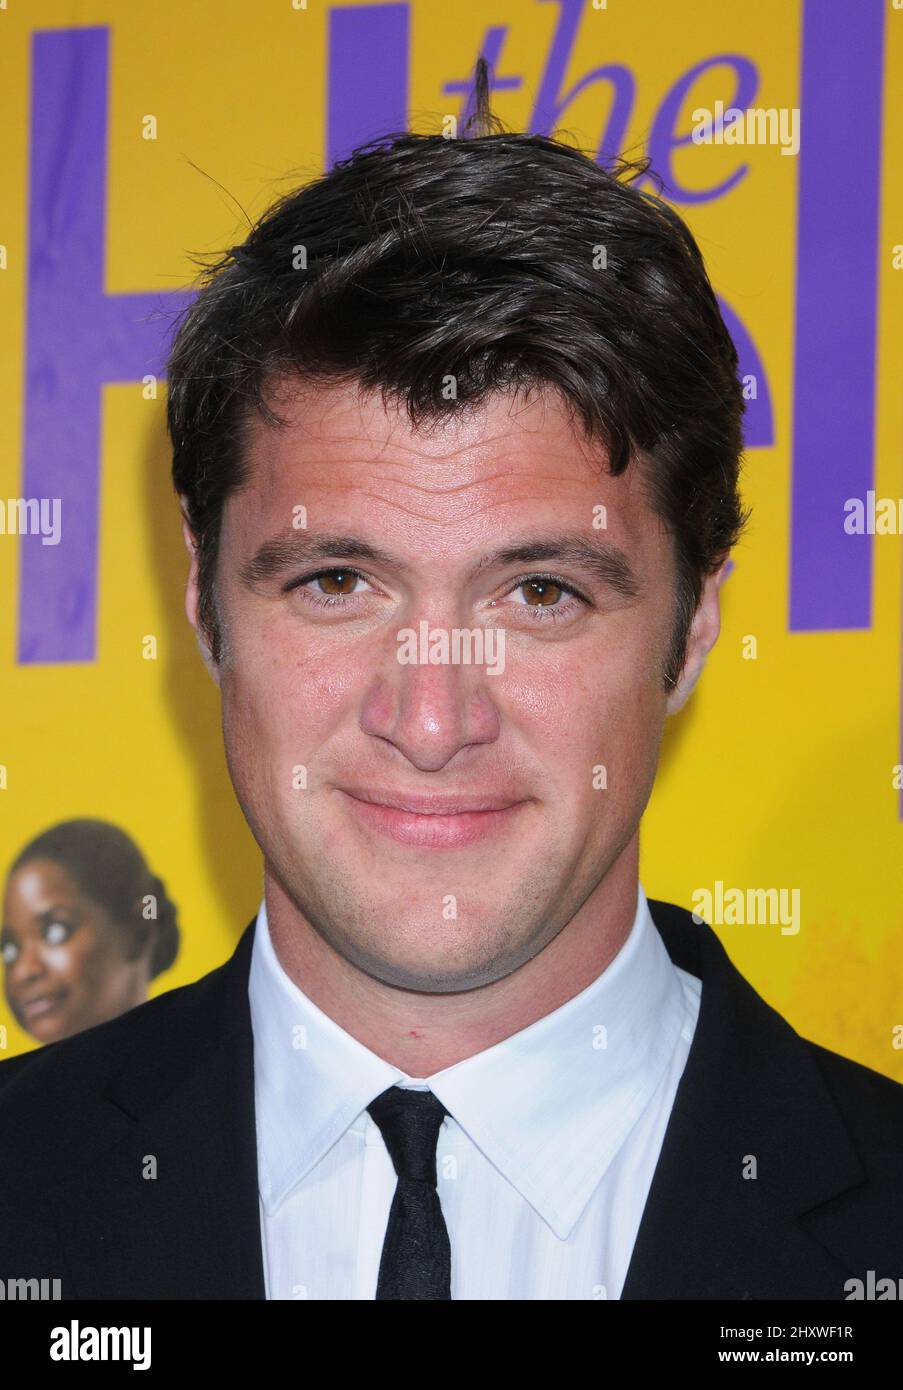 Shane McRae at 'The Help' World Premiere at the Samuel Goldwyn Theater on August 9, 2011 in Beverly Hills, California. Stock Photo